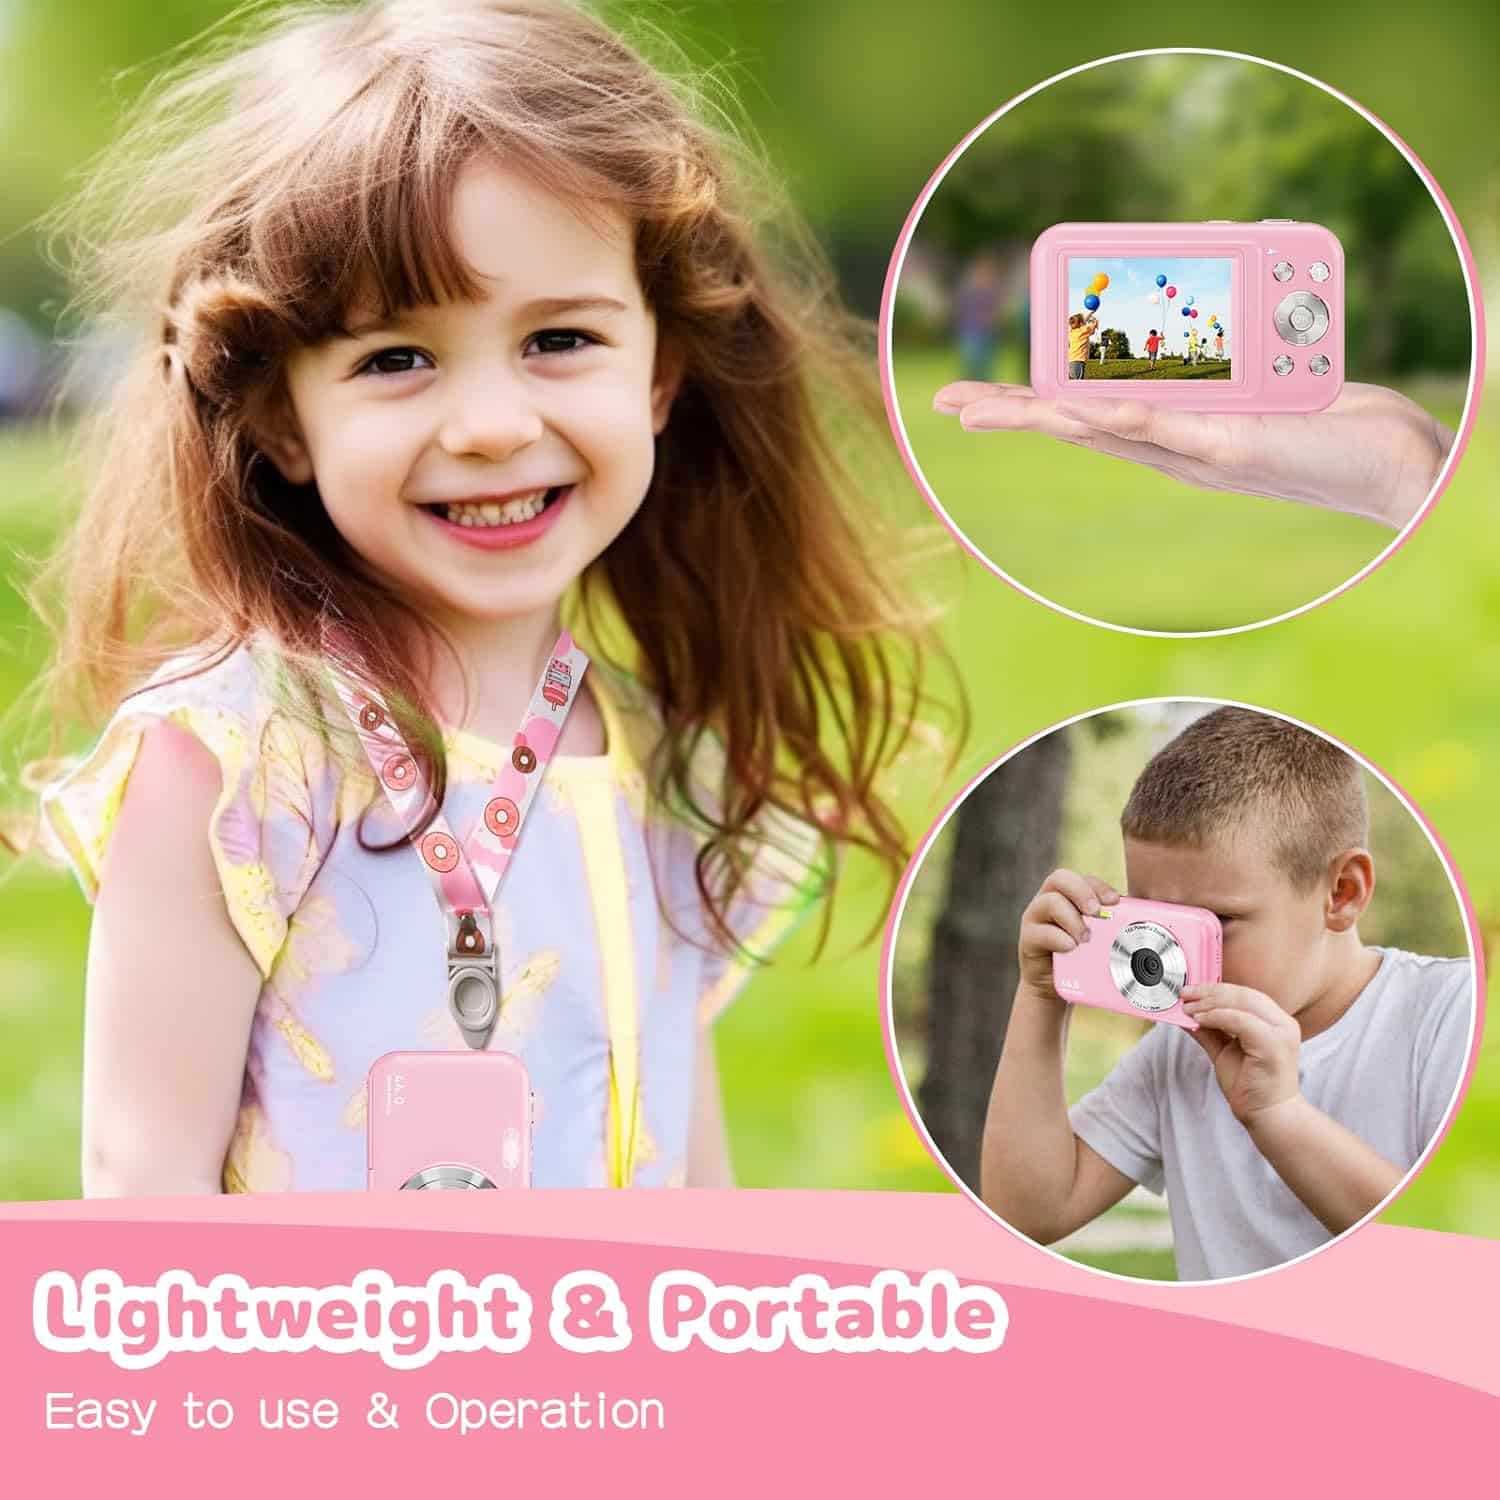 Capture Unforgettable Moments with the Digital Camera, Kids Camera with 32GB Card